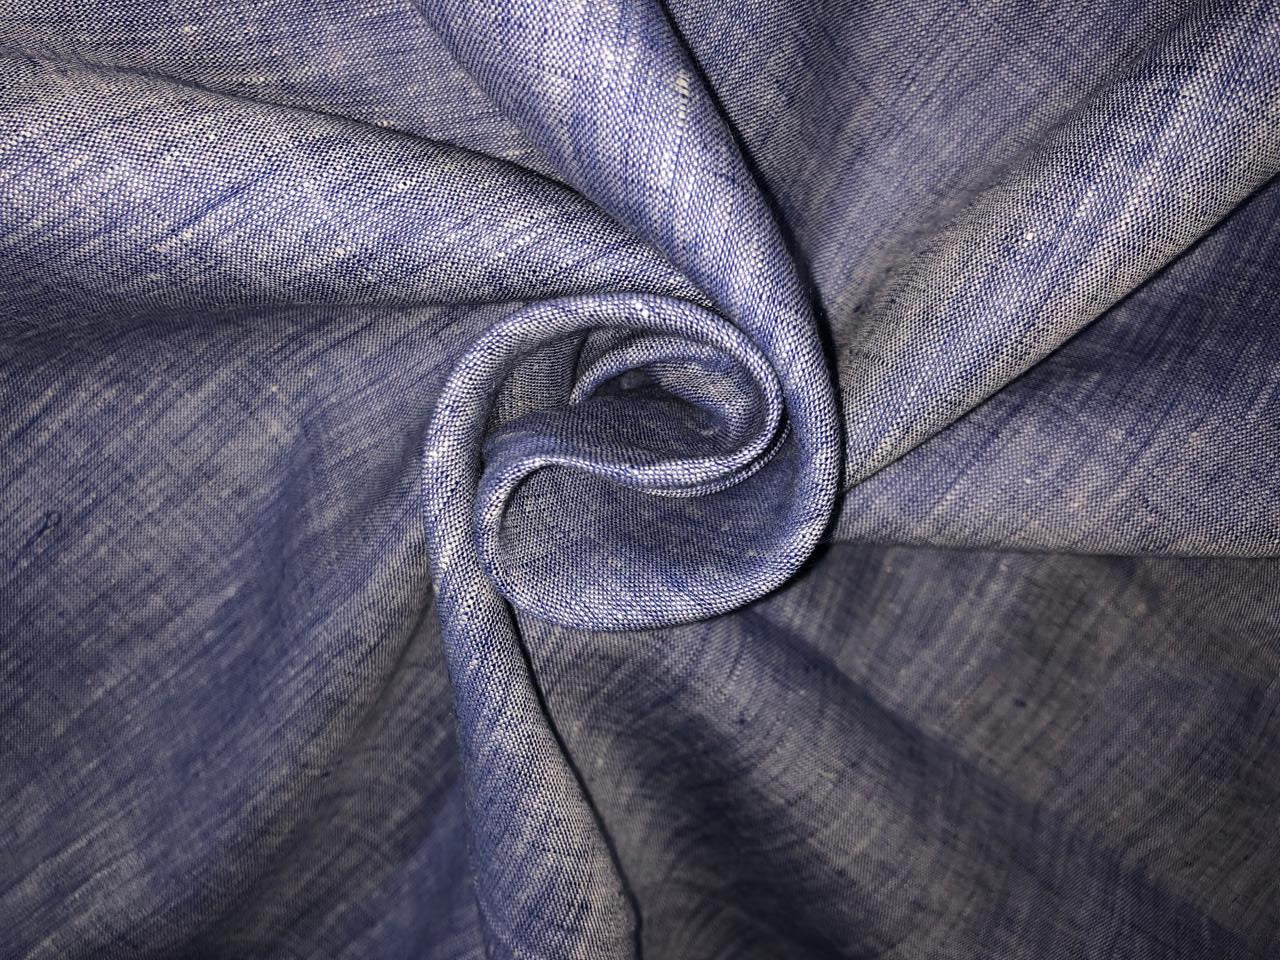 100% LINEN TWO TONE 58"available in 6 colors BLACK X IVORY /BLUE X IVORY/ GREEN X IVORY /CHARCOAL X IVORY/ PURPLE X IVORY AND PEACH X IVORY